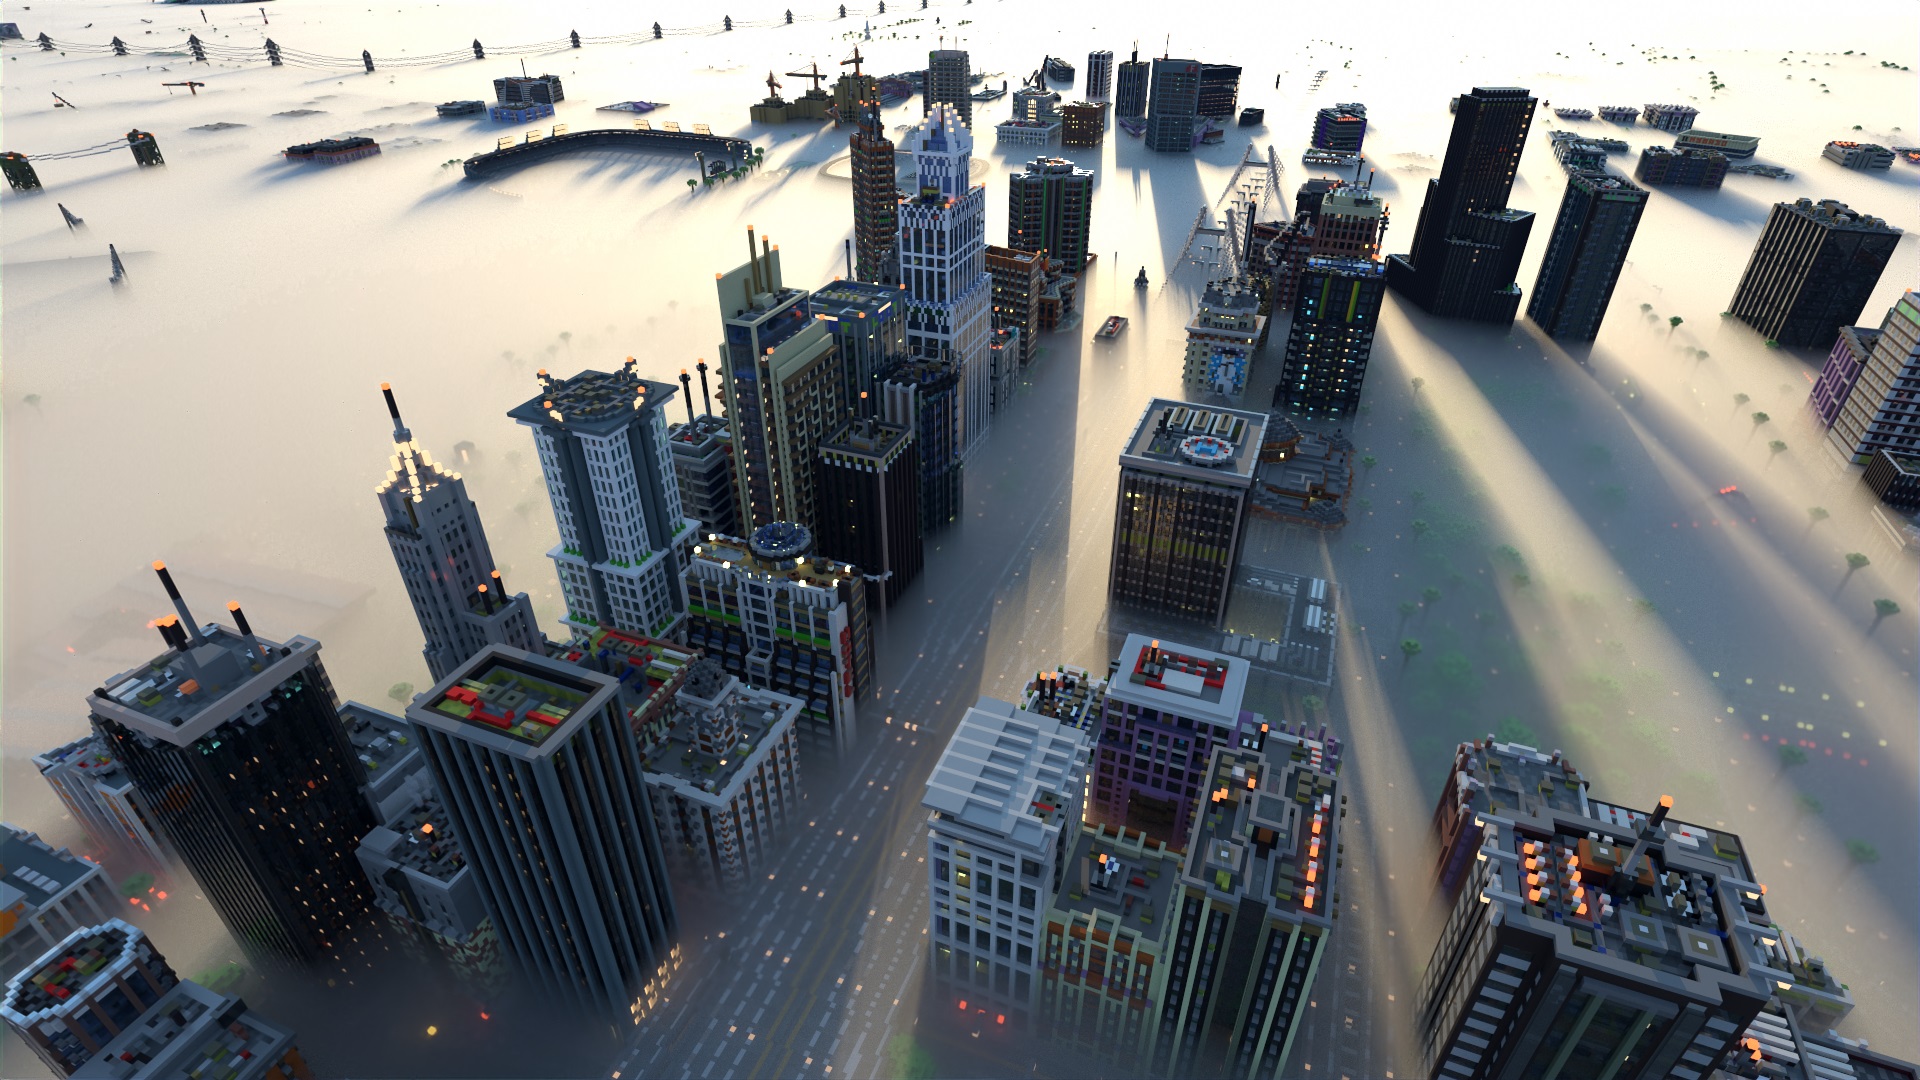 Avoyd Avoyd Render - Minecraft map Greenfield City imported, edited to add fog, and rendered in Avoyd